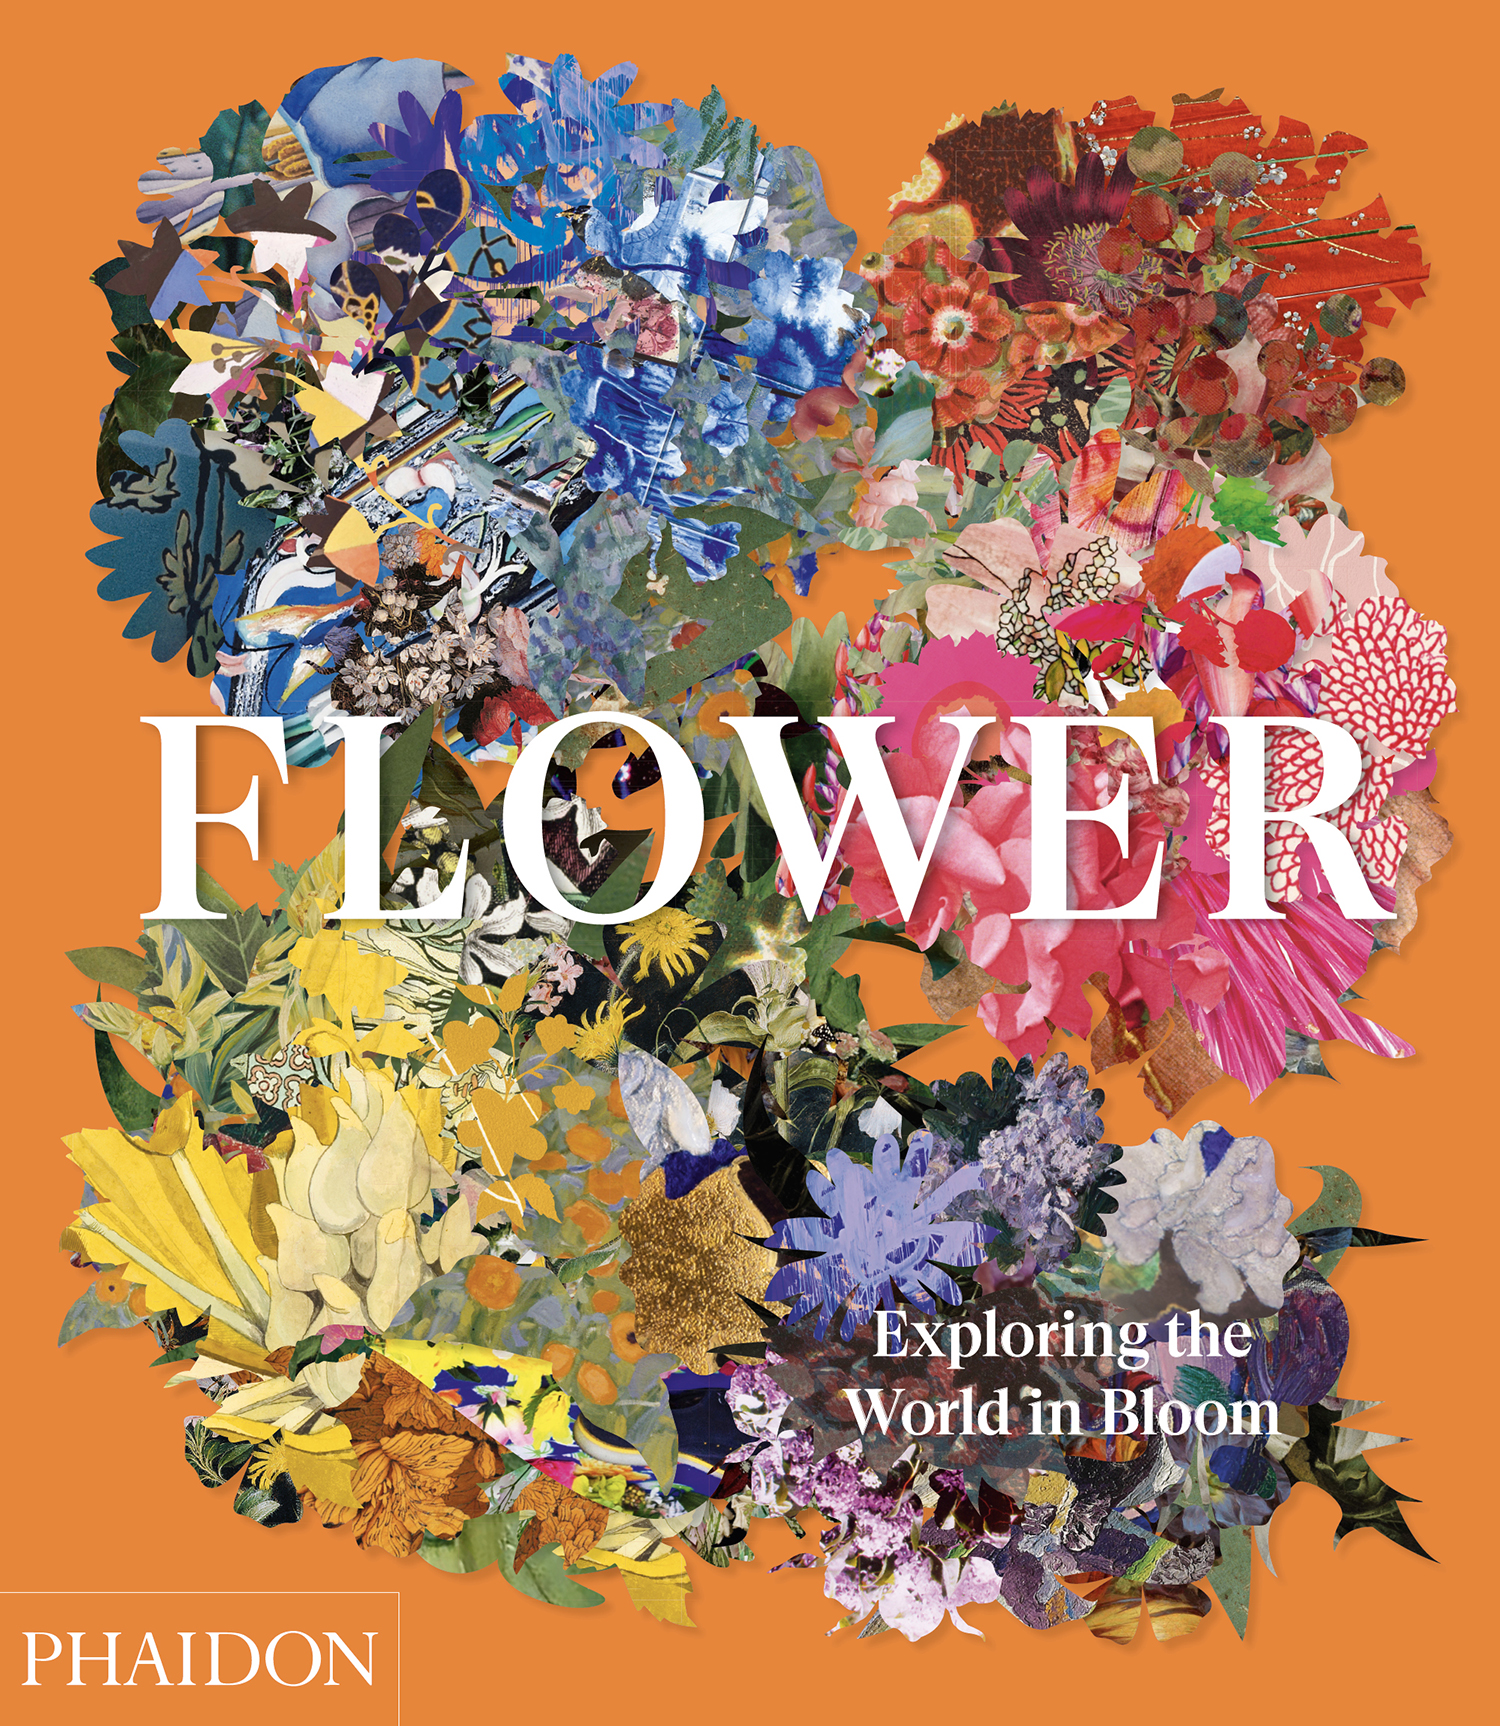 Phaidon takes us on a journey to explore the World in Bloom